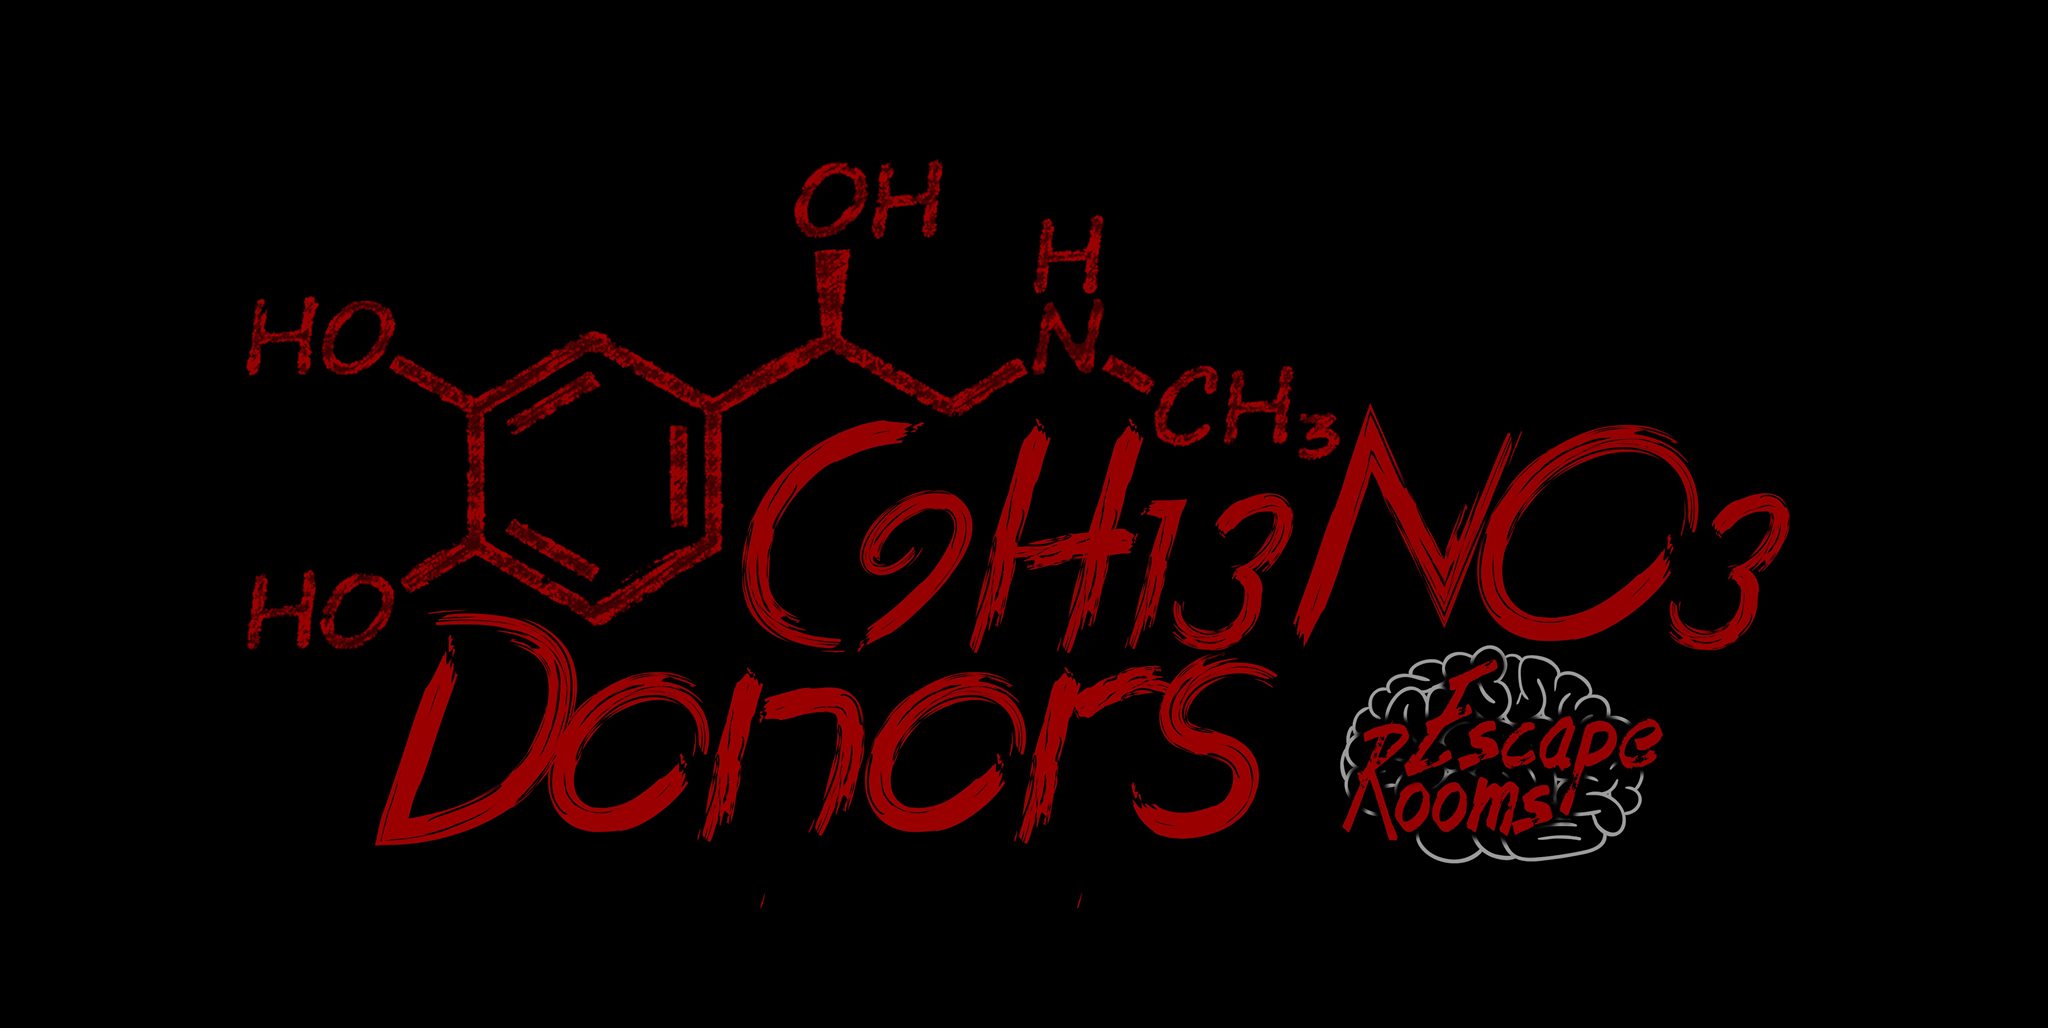 C9H13NO3 DONORS